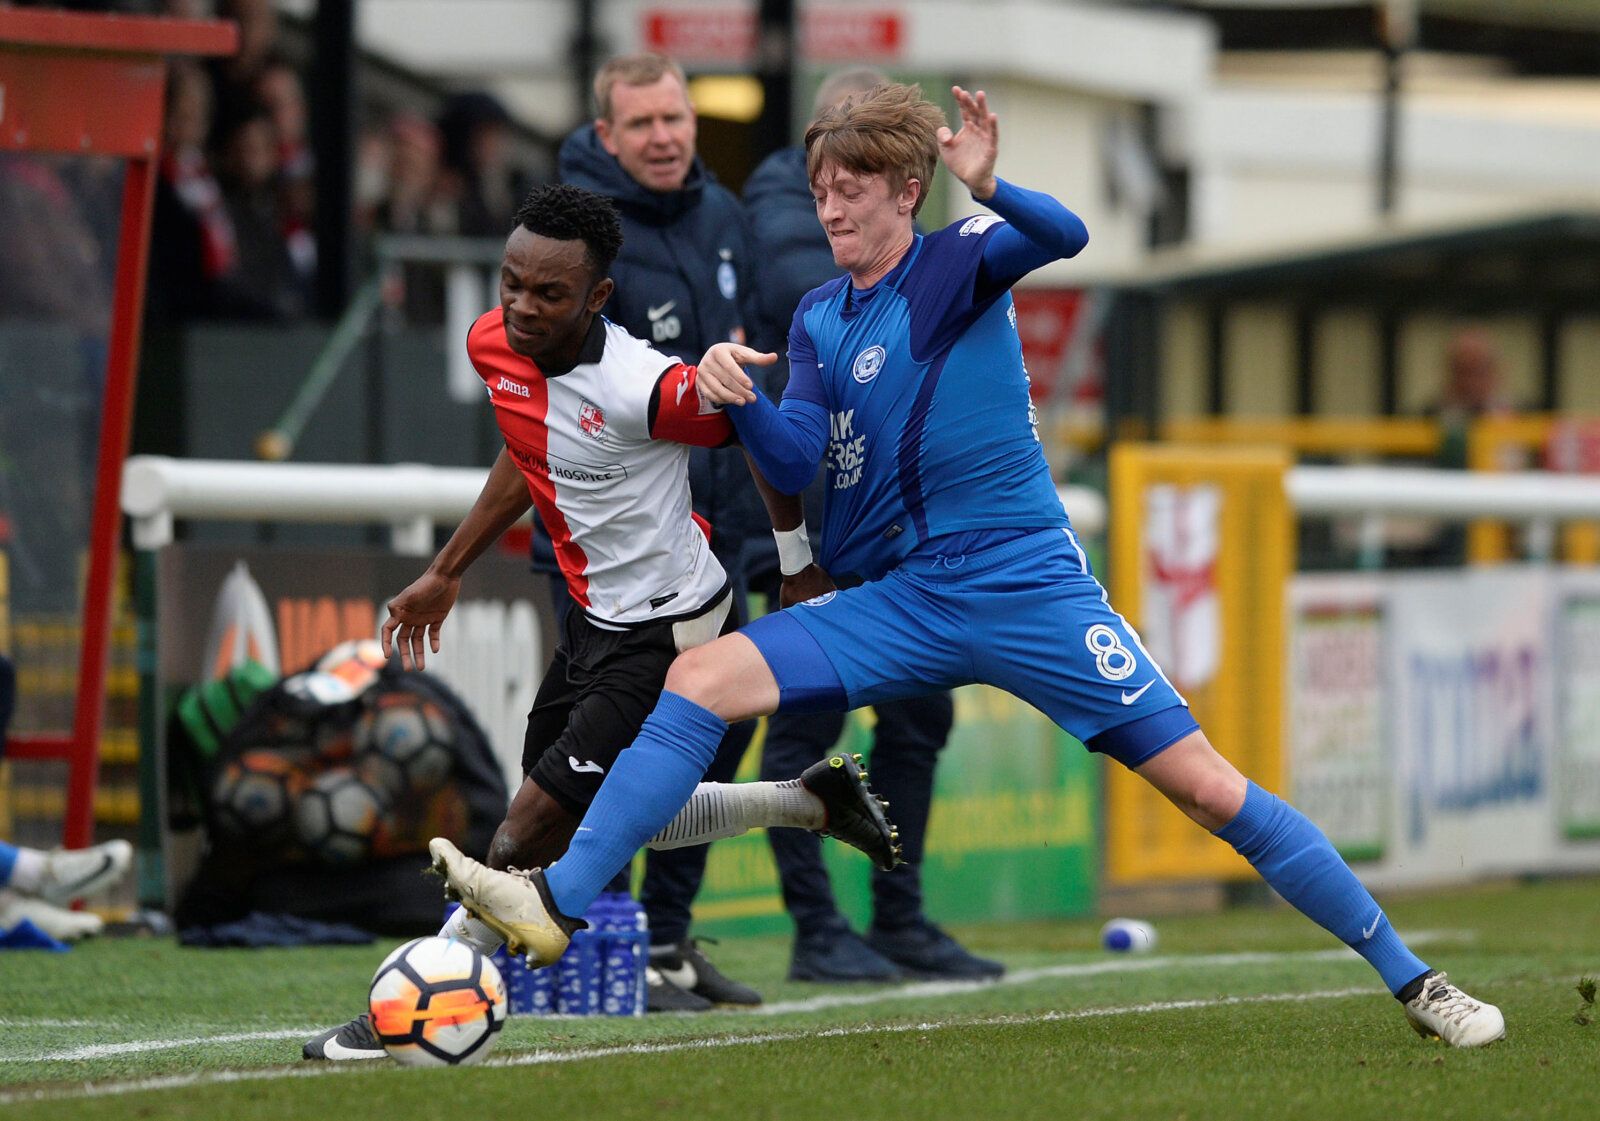 Soccer Football - FA Cup Second Round - Woking vs Peterborough United - The Laithwaite Community Stadium, Woking, Britain - December 3, 2017  Peterborough's Chris Forrester in action with Woking's Regan Charles-Cook   Action Images/Alan Walter